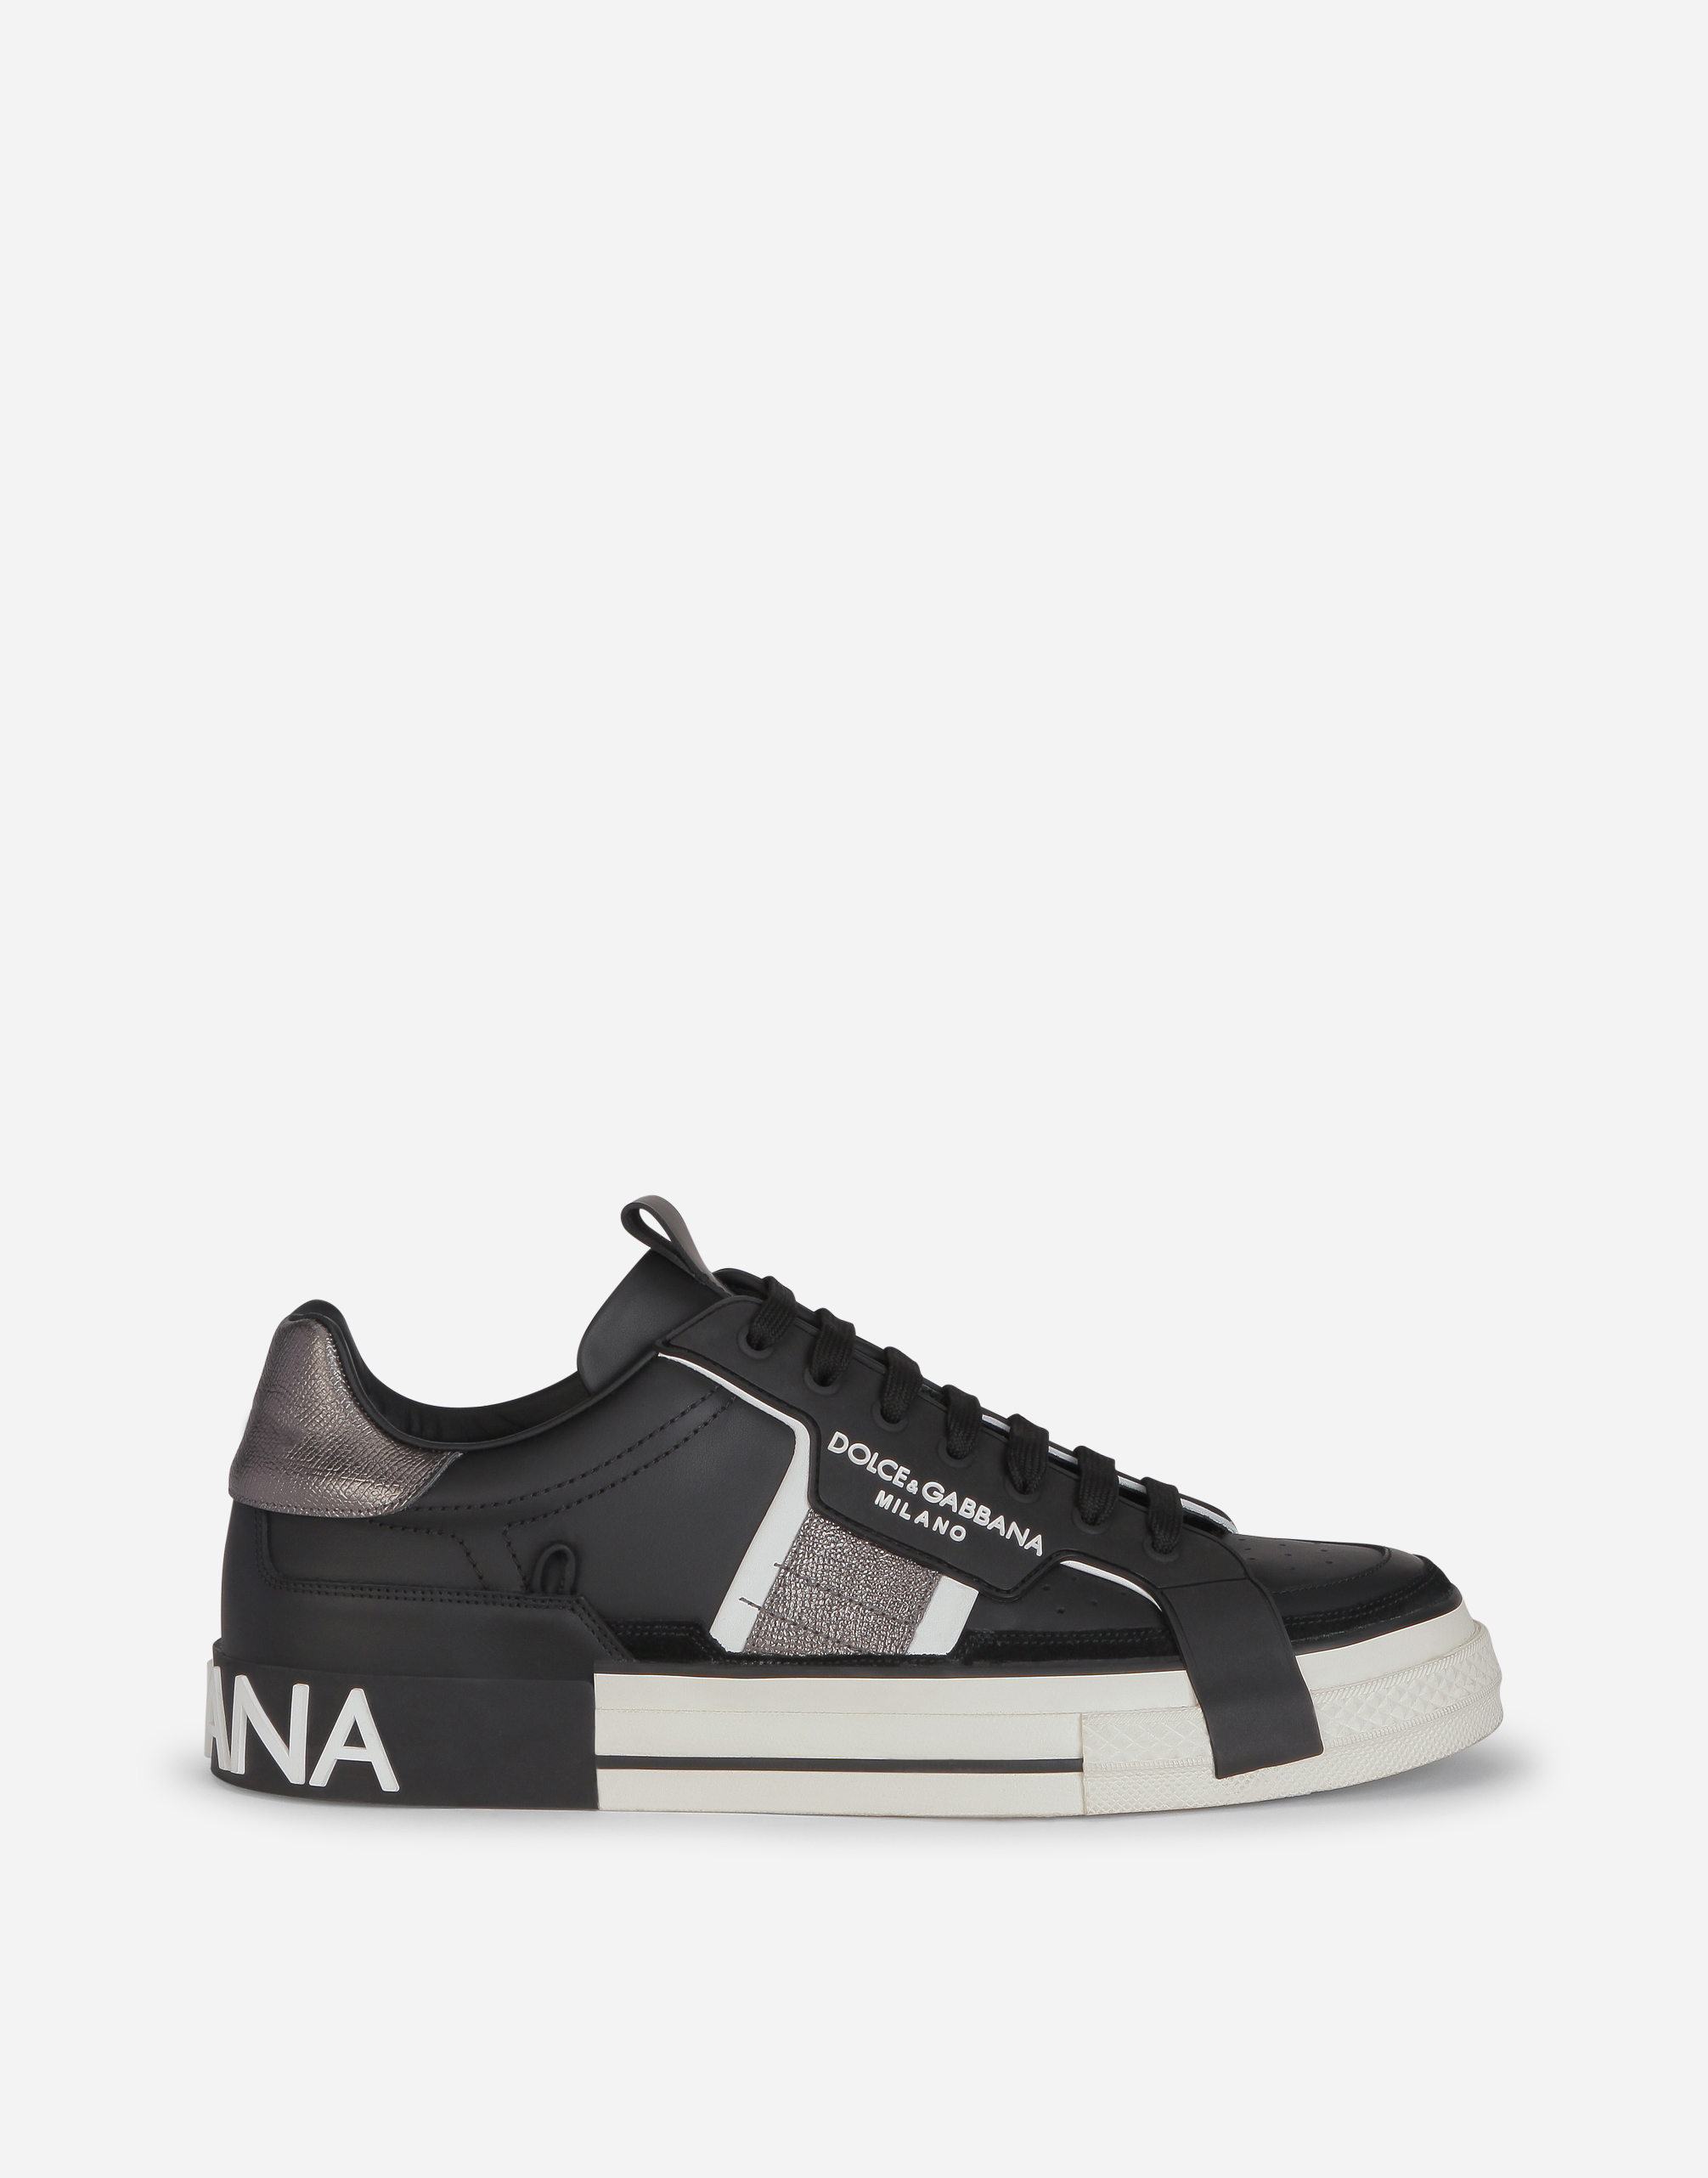 Calfskin 2.Zero Custom sneakers with contrasting details in Black/Silver